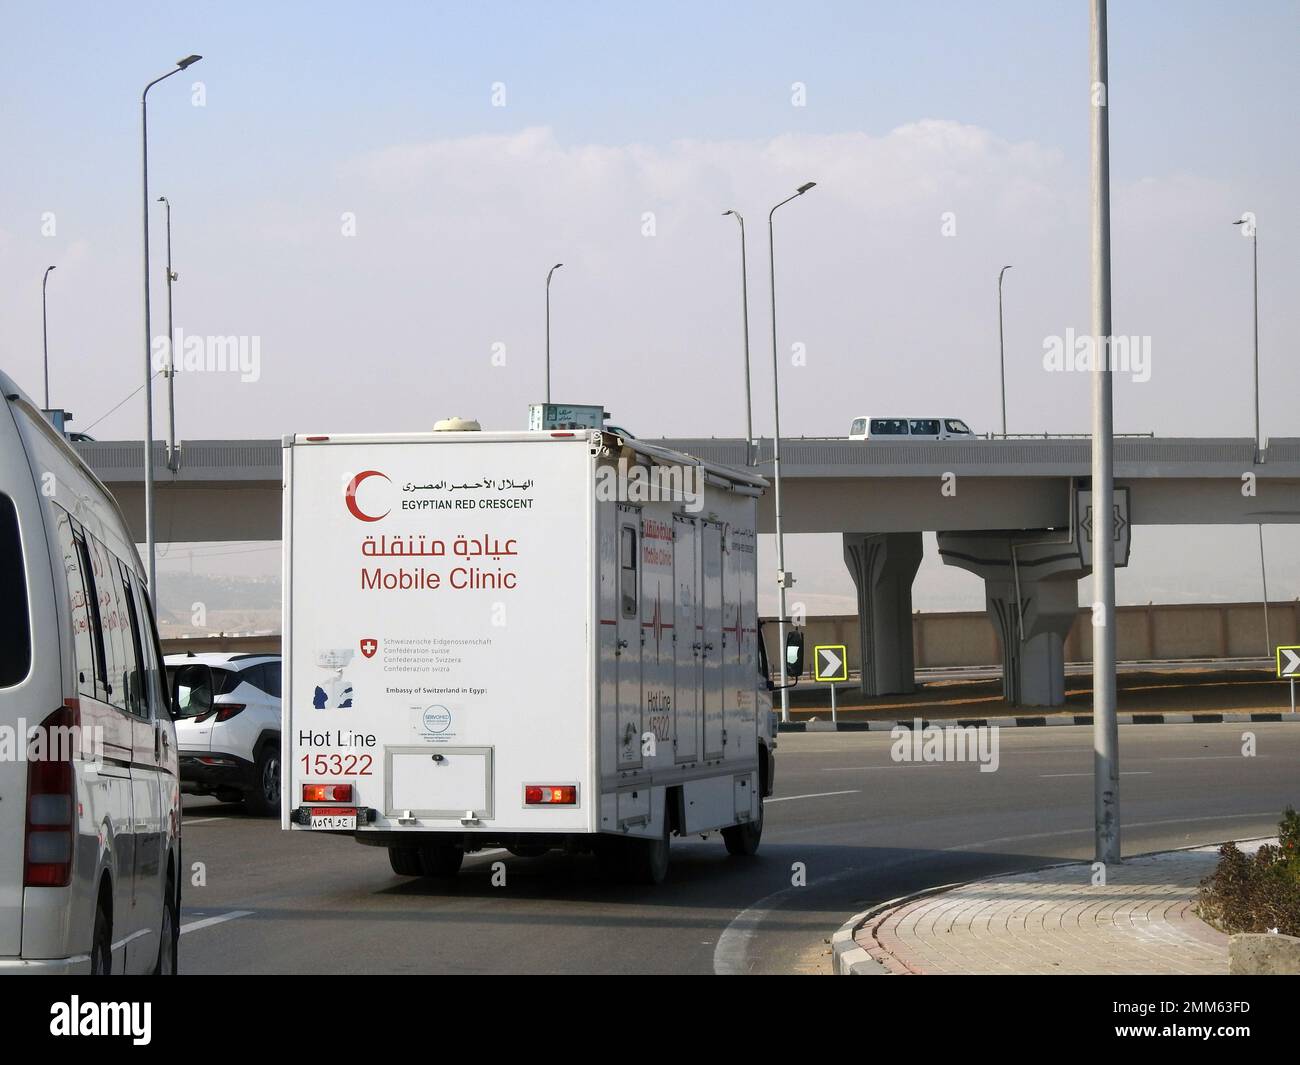 Cairo, Egypt, January 8 2023: A mobile medical clinic vehicle of the Egyptian red crescent that gives medical services in Cairo, patient examination a Stock Photo